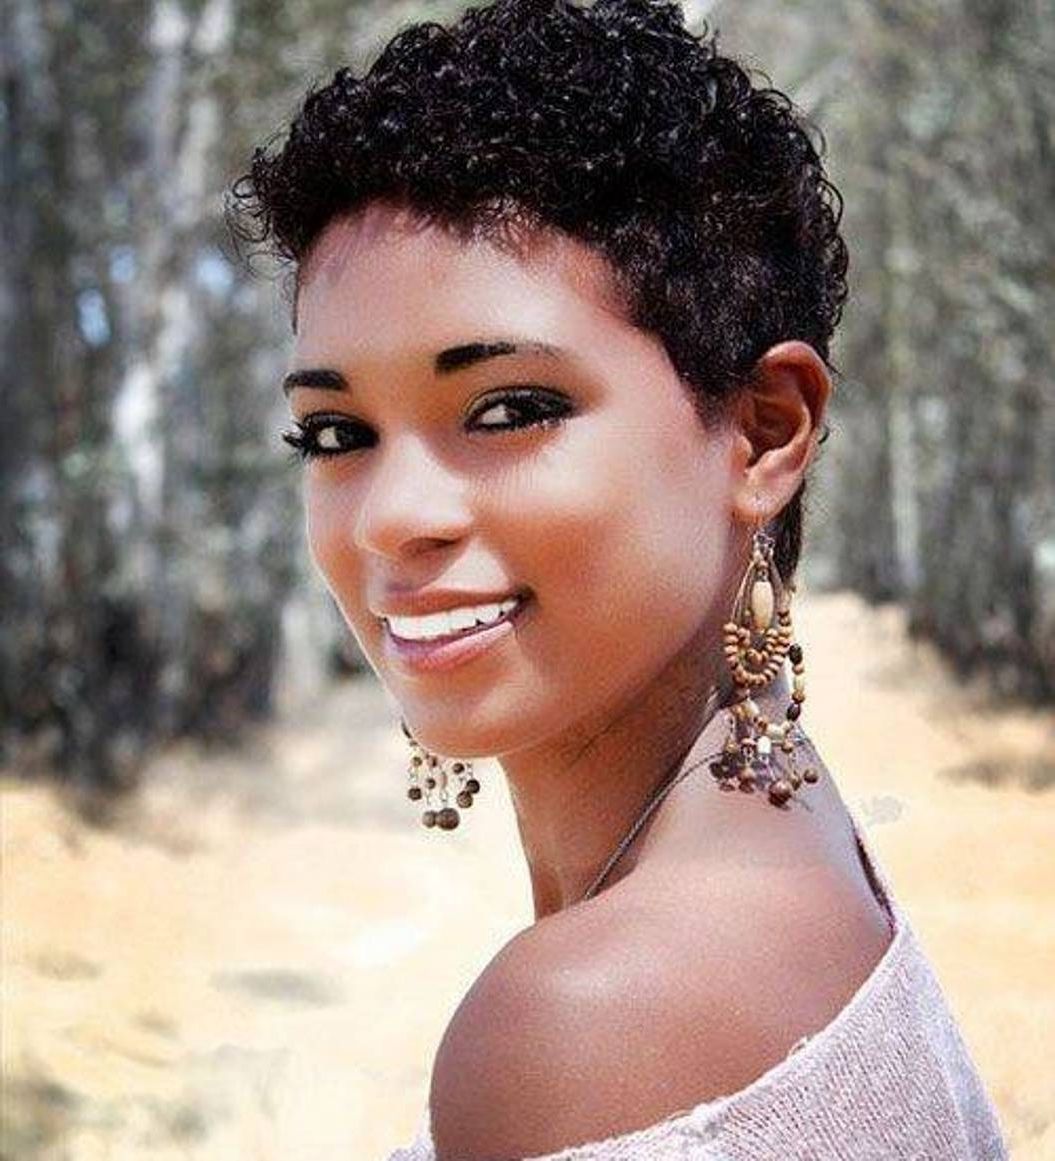 Beyonce Hair Themes To Natural Short Black Hairstyles Fade Haircut Intended For Most Current Short Black Hairstyles For Curly Hair (View 7 of 15)